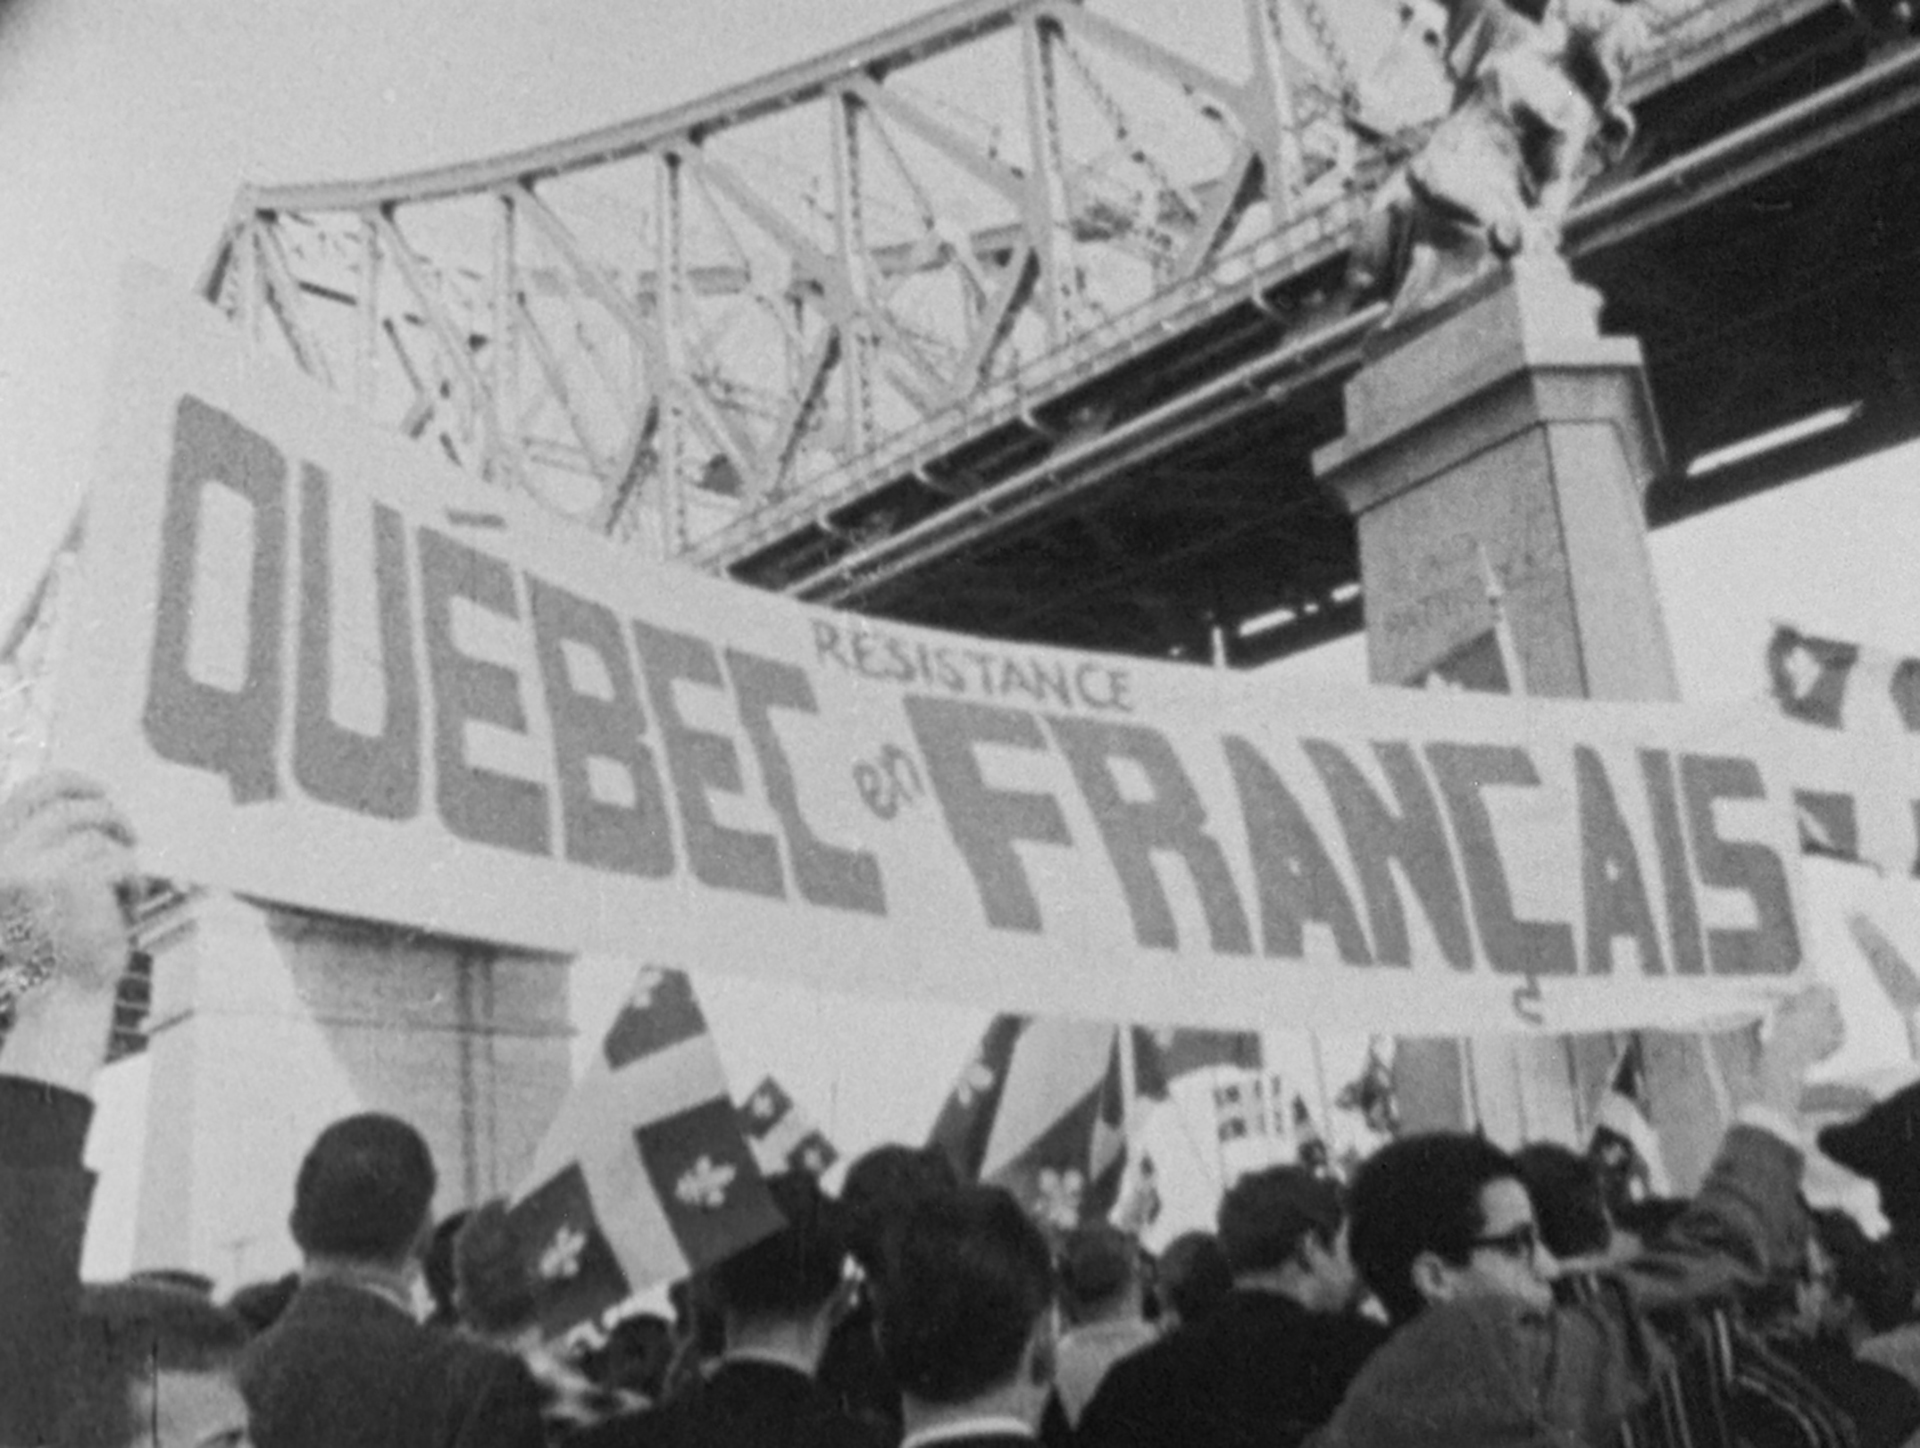 Quebec enforces laws to protect the French language, 1977